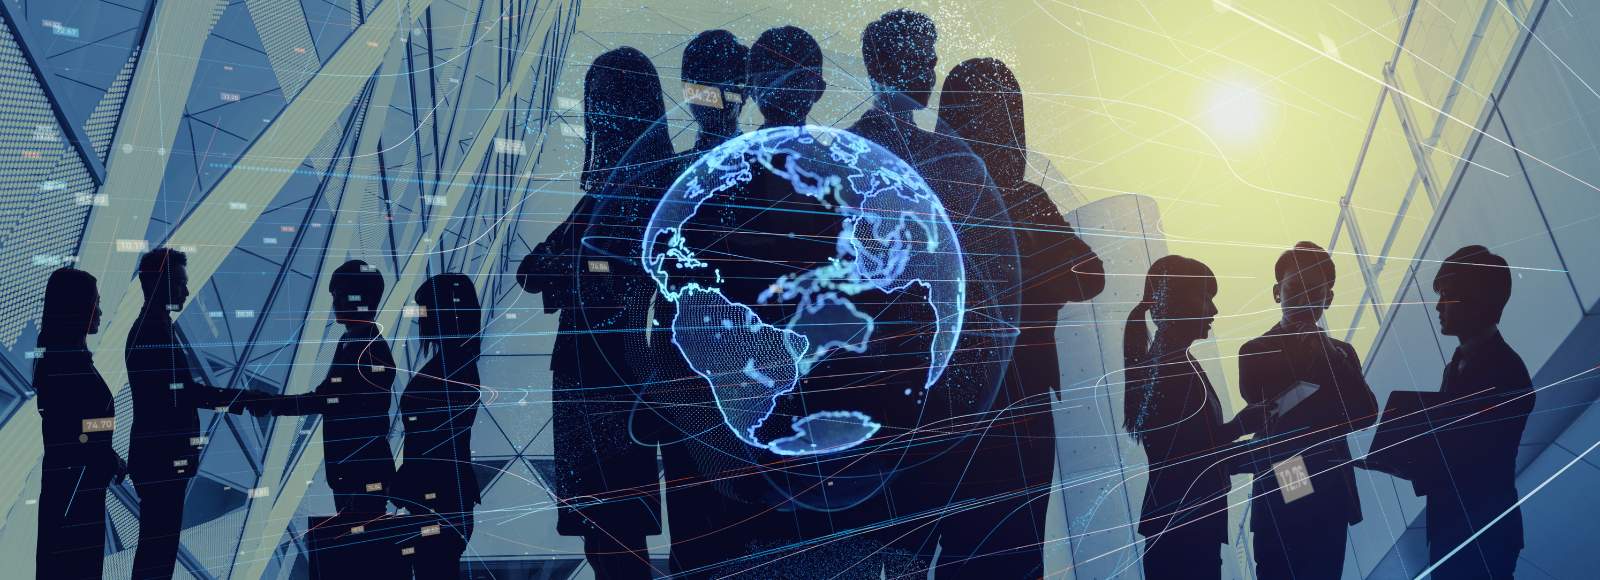 graphic depicts global networking among students